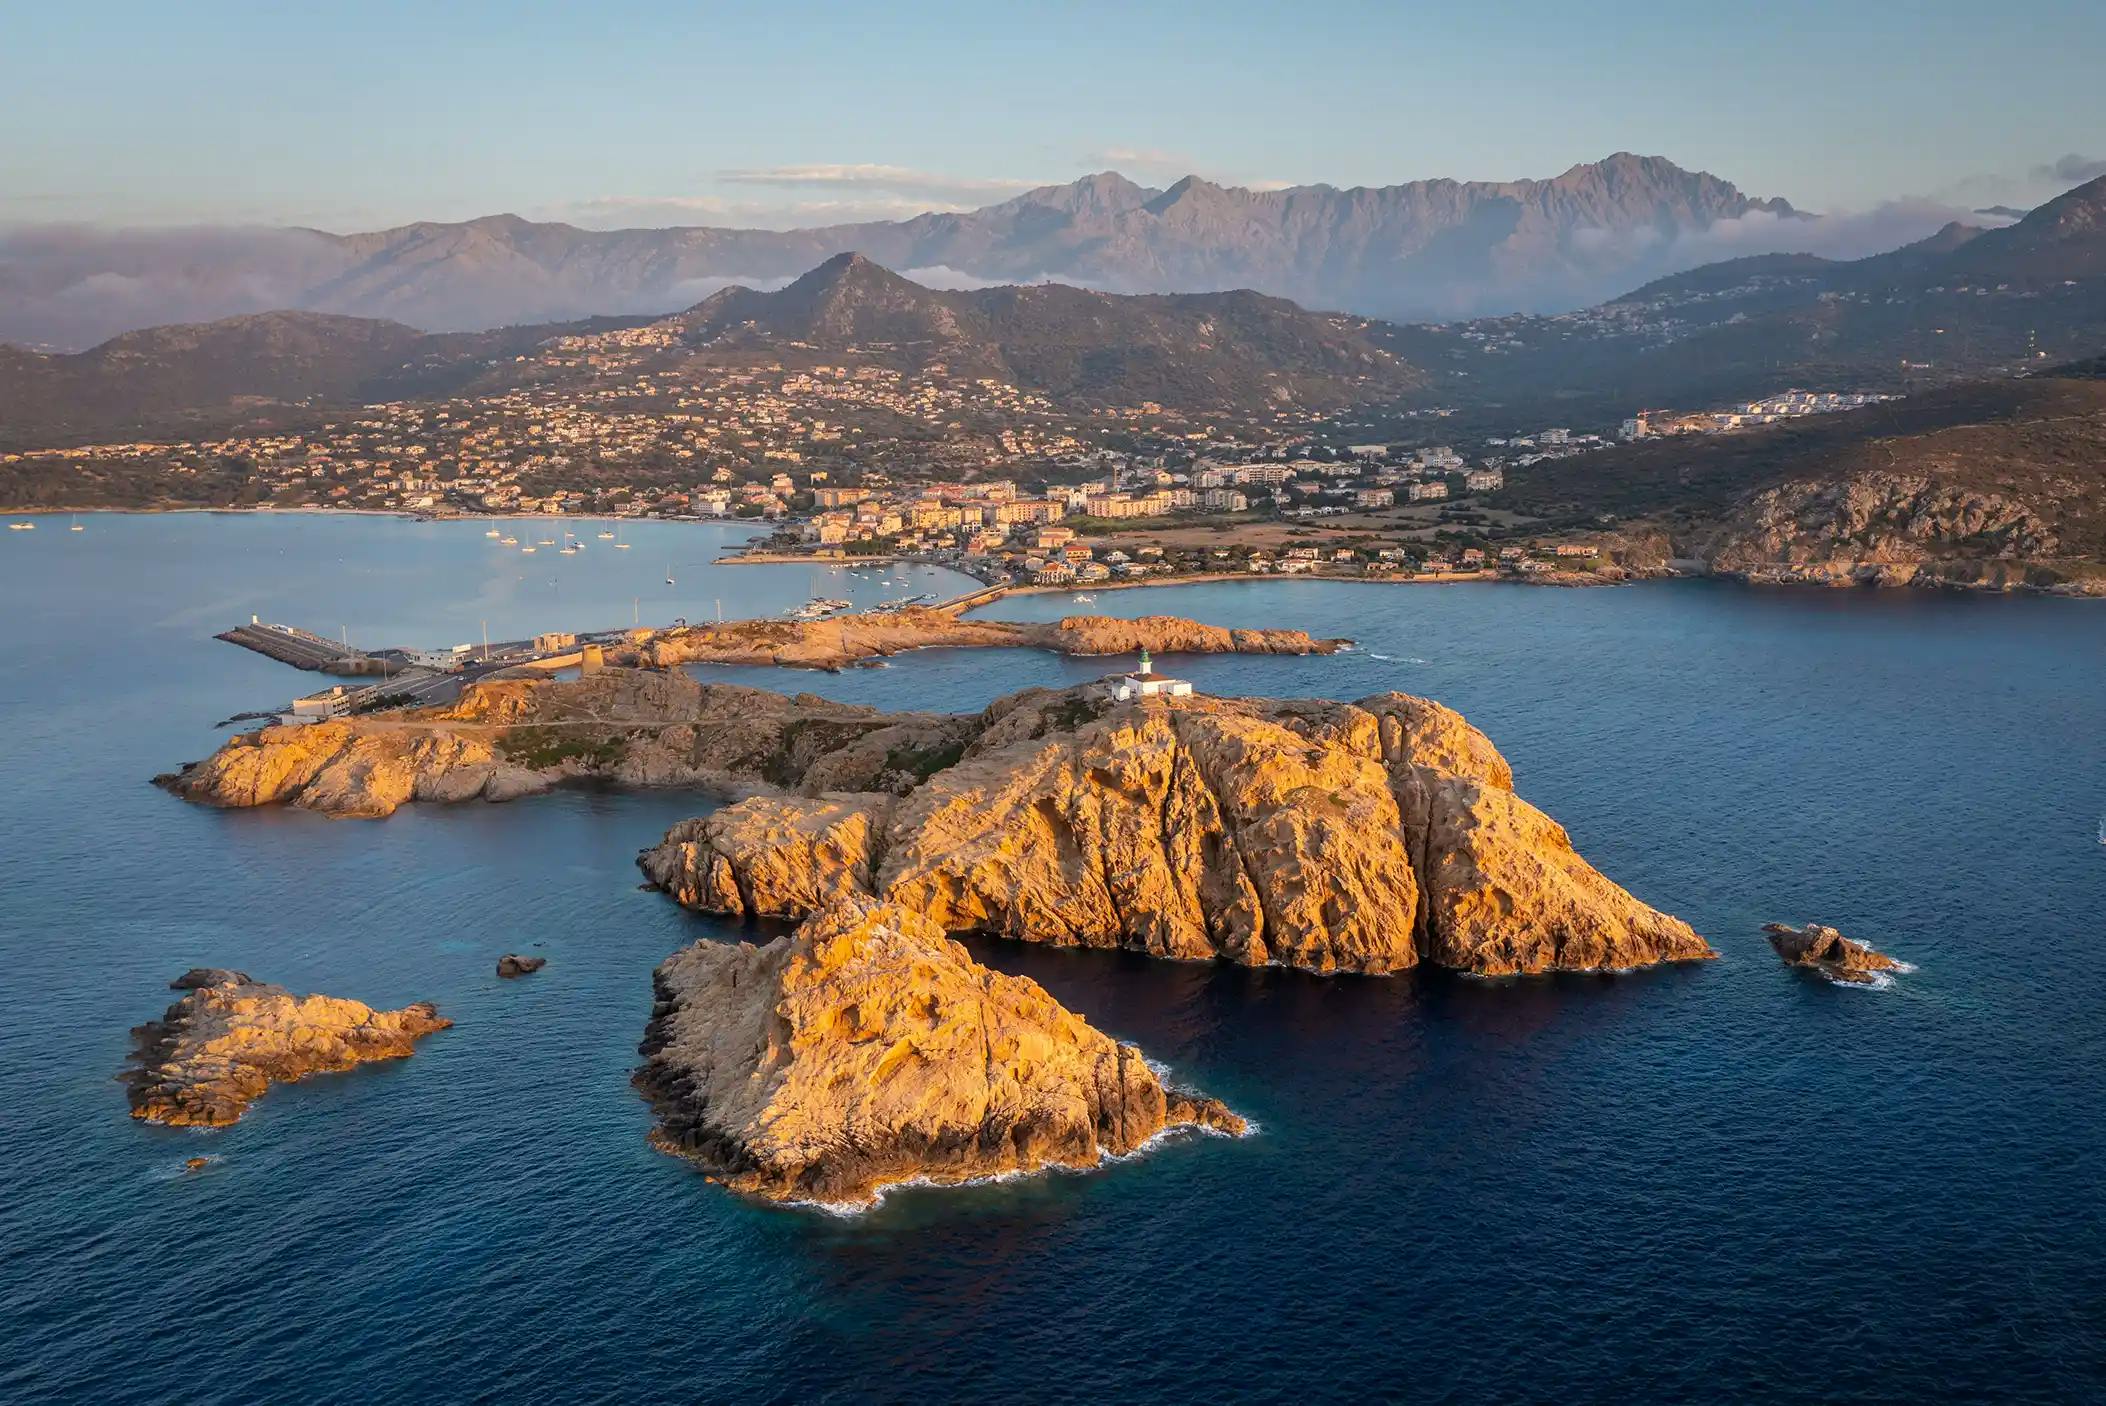 Aerial view of L'Île-Rousse, Corsica, France